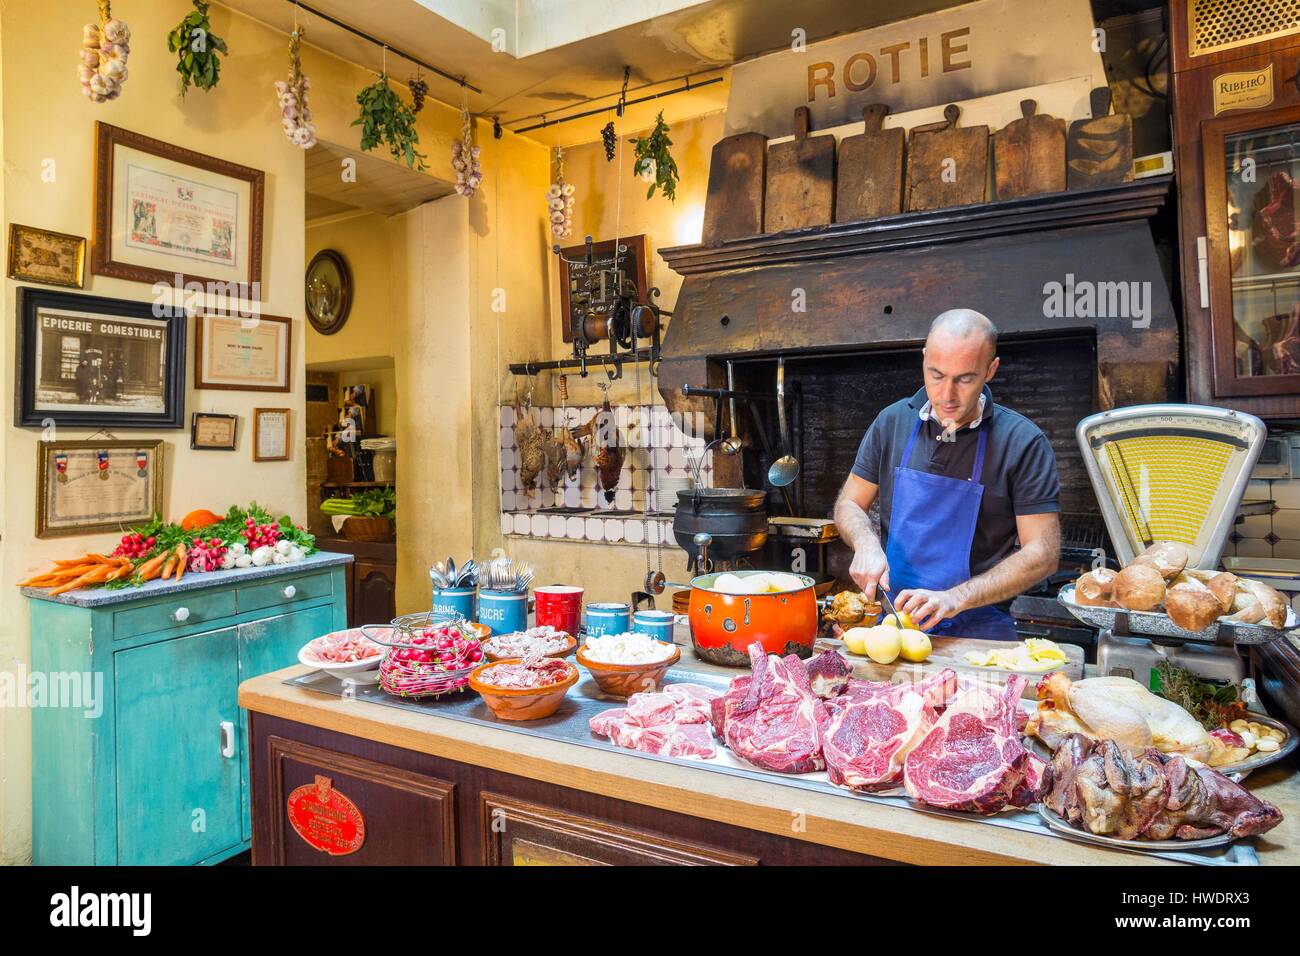 France, Gironde, Bordeaux, Porte de la Monnaie street, restaurant La Tupina founded in 1968 by Jean-Pierre Xiradakis and specialized in South-West cuisine, preparing French fries and grilled meats Stock Photo